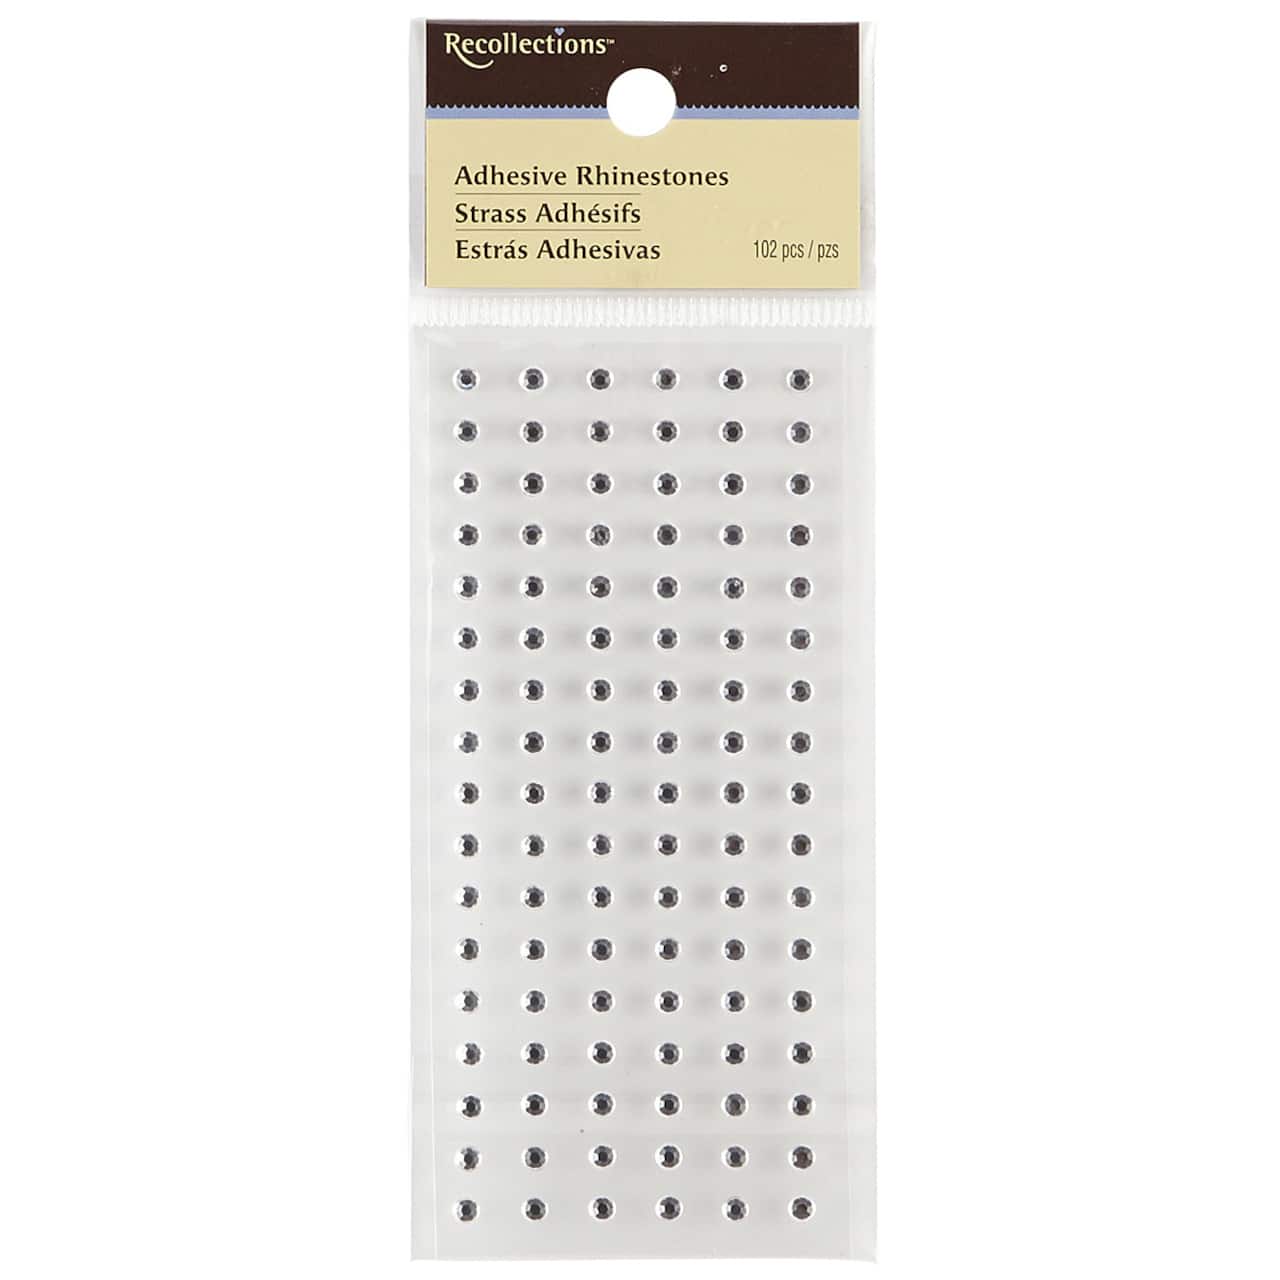 3mm Clear Adhesive Rhinestones by Recollections™